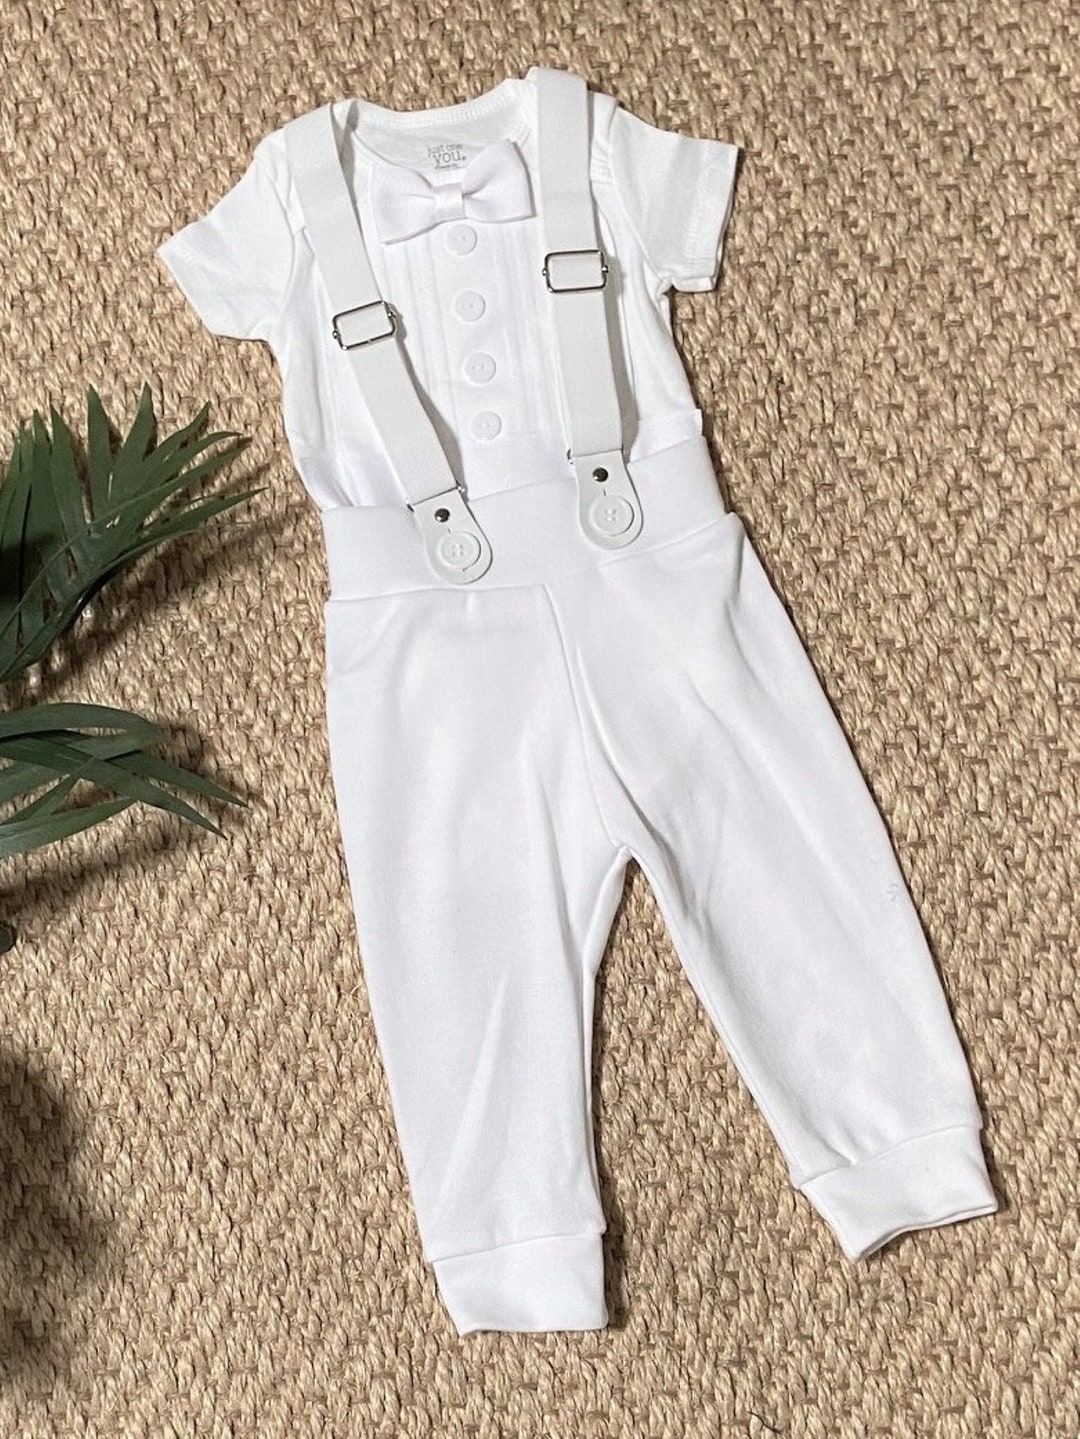 Short Sleeve Baby Boy Baptism, Christening, Blessing, Wedding Outfit ...